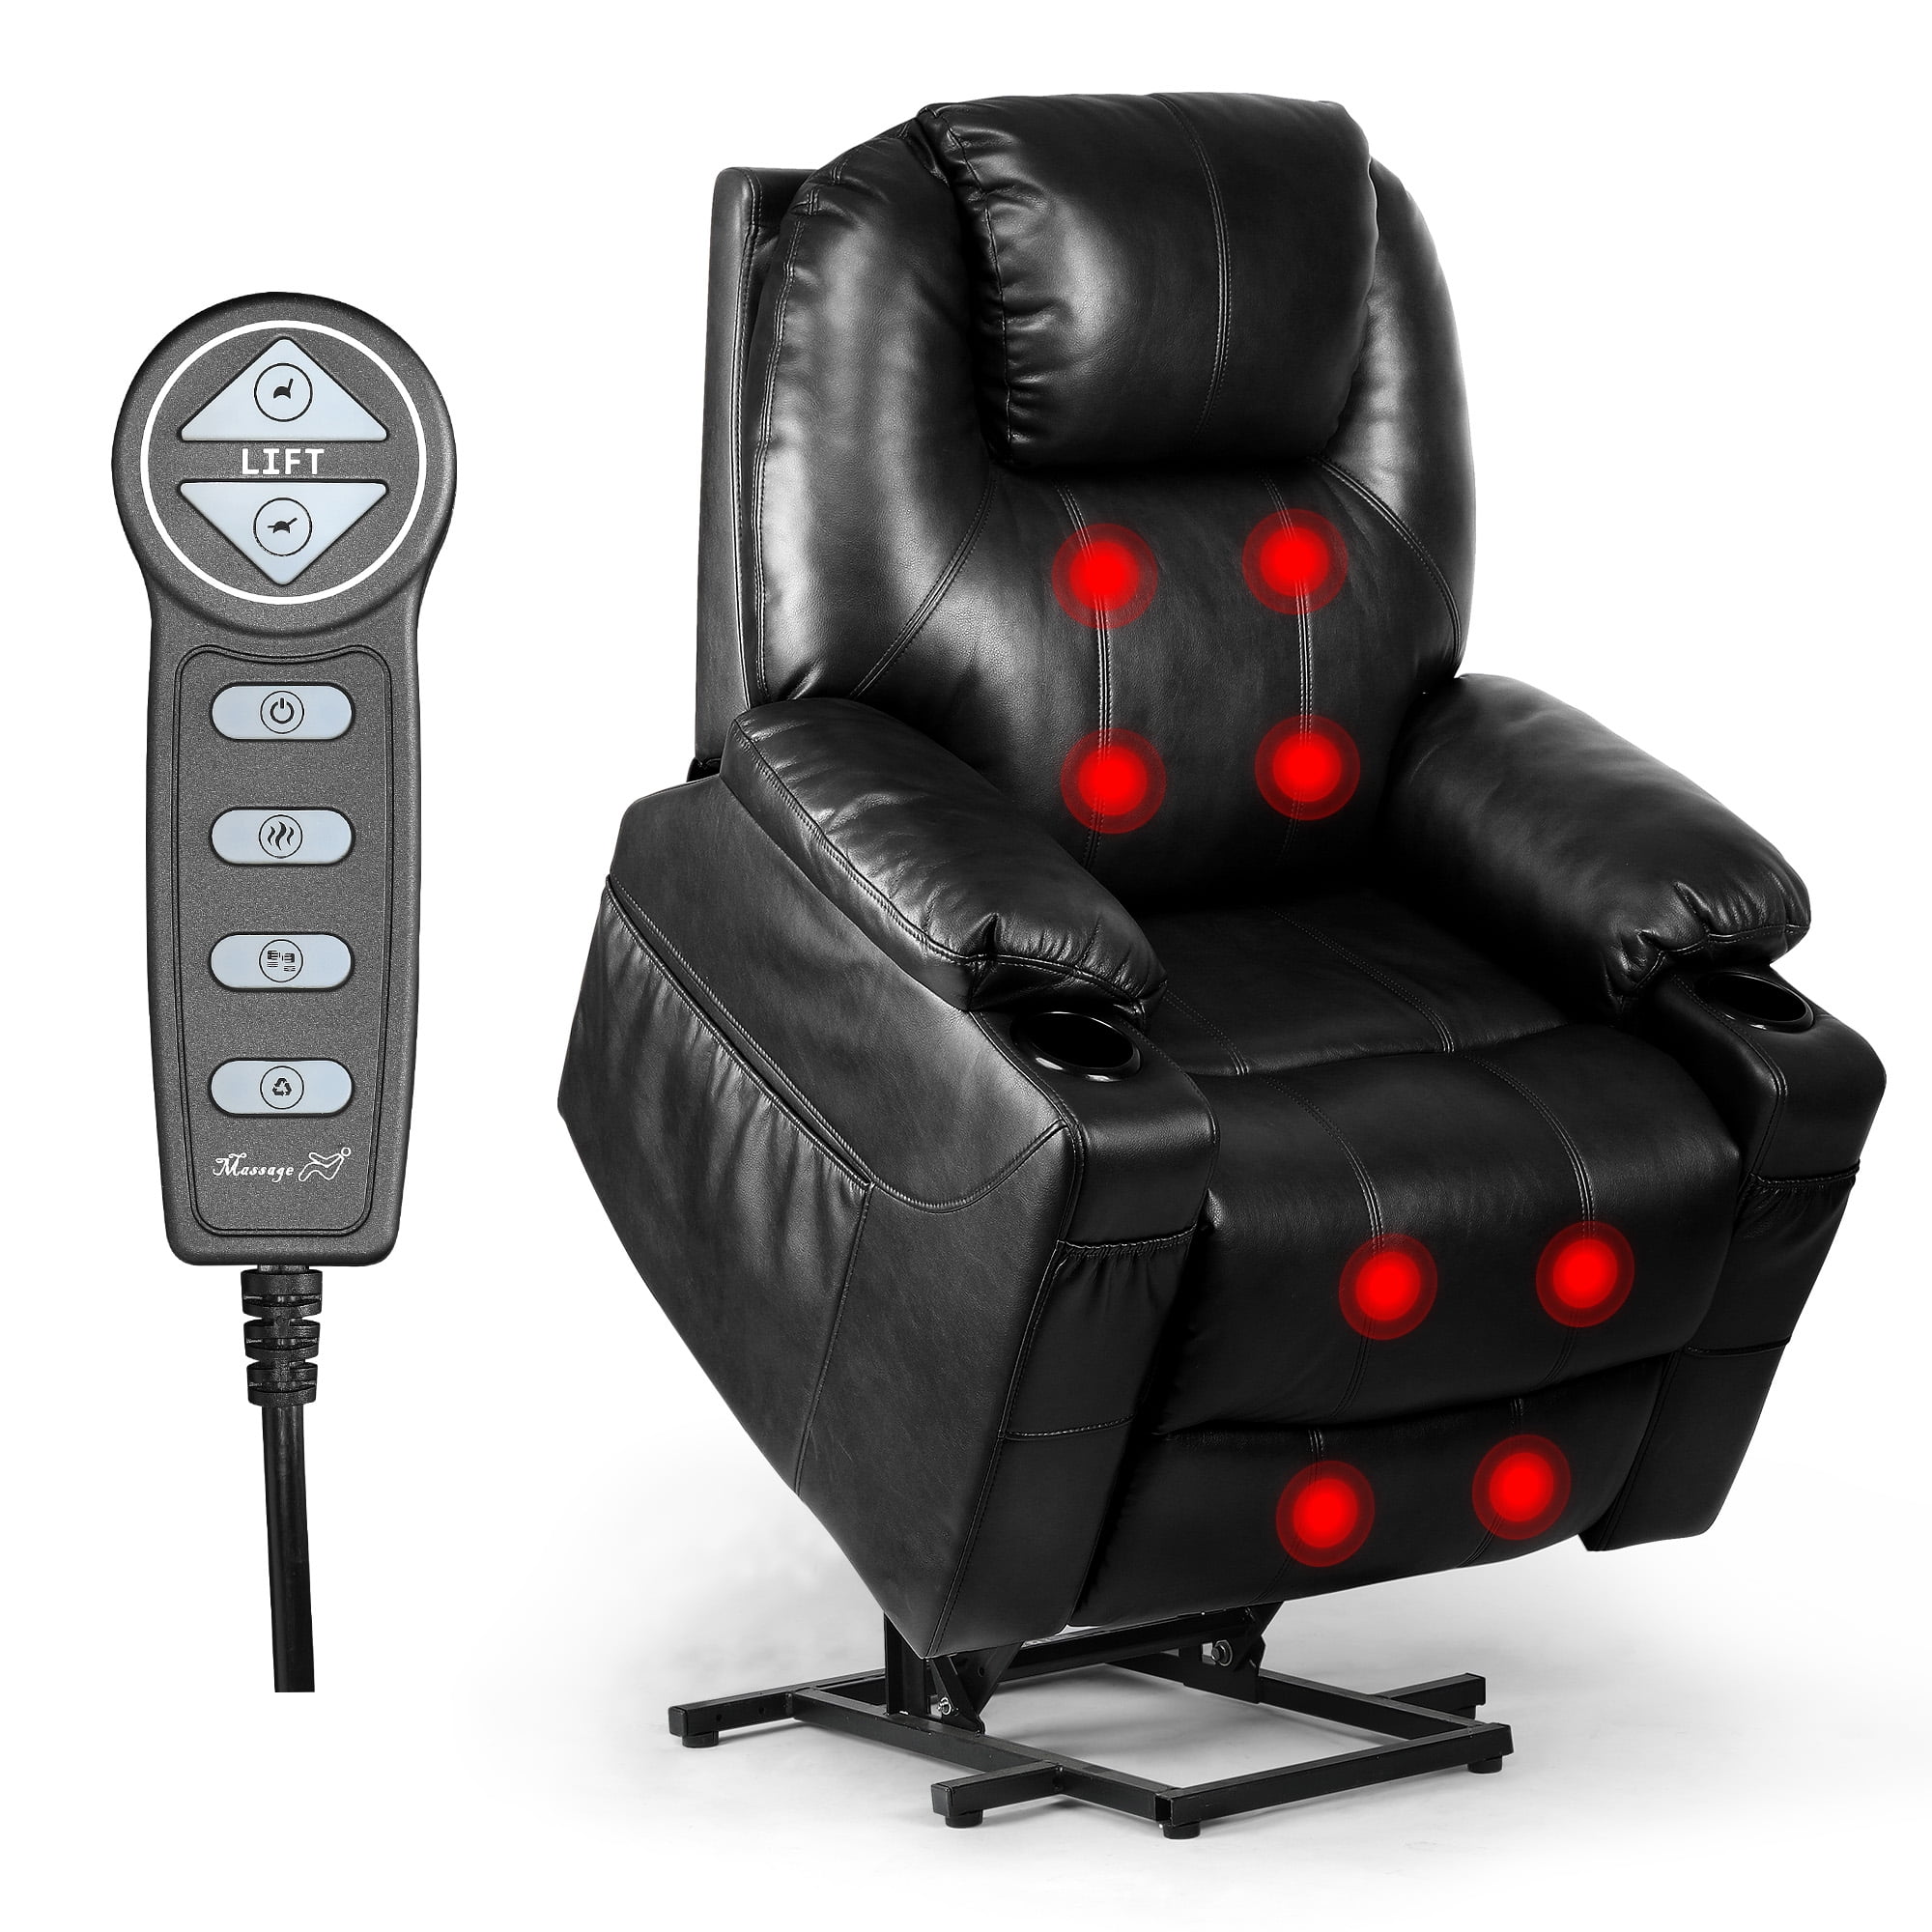 Yitahome Lift Recliner Massage Chair, Black Faux Leather Massage Chair